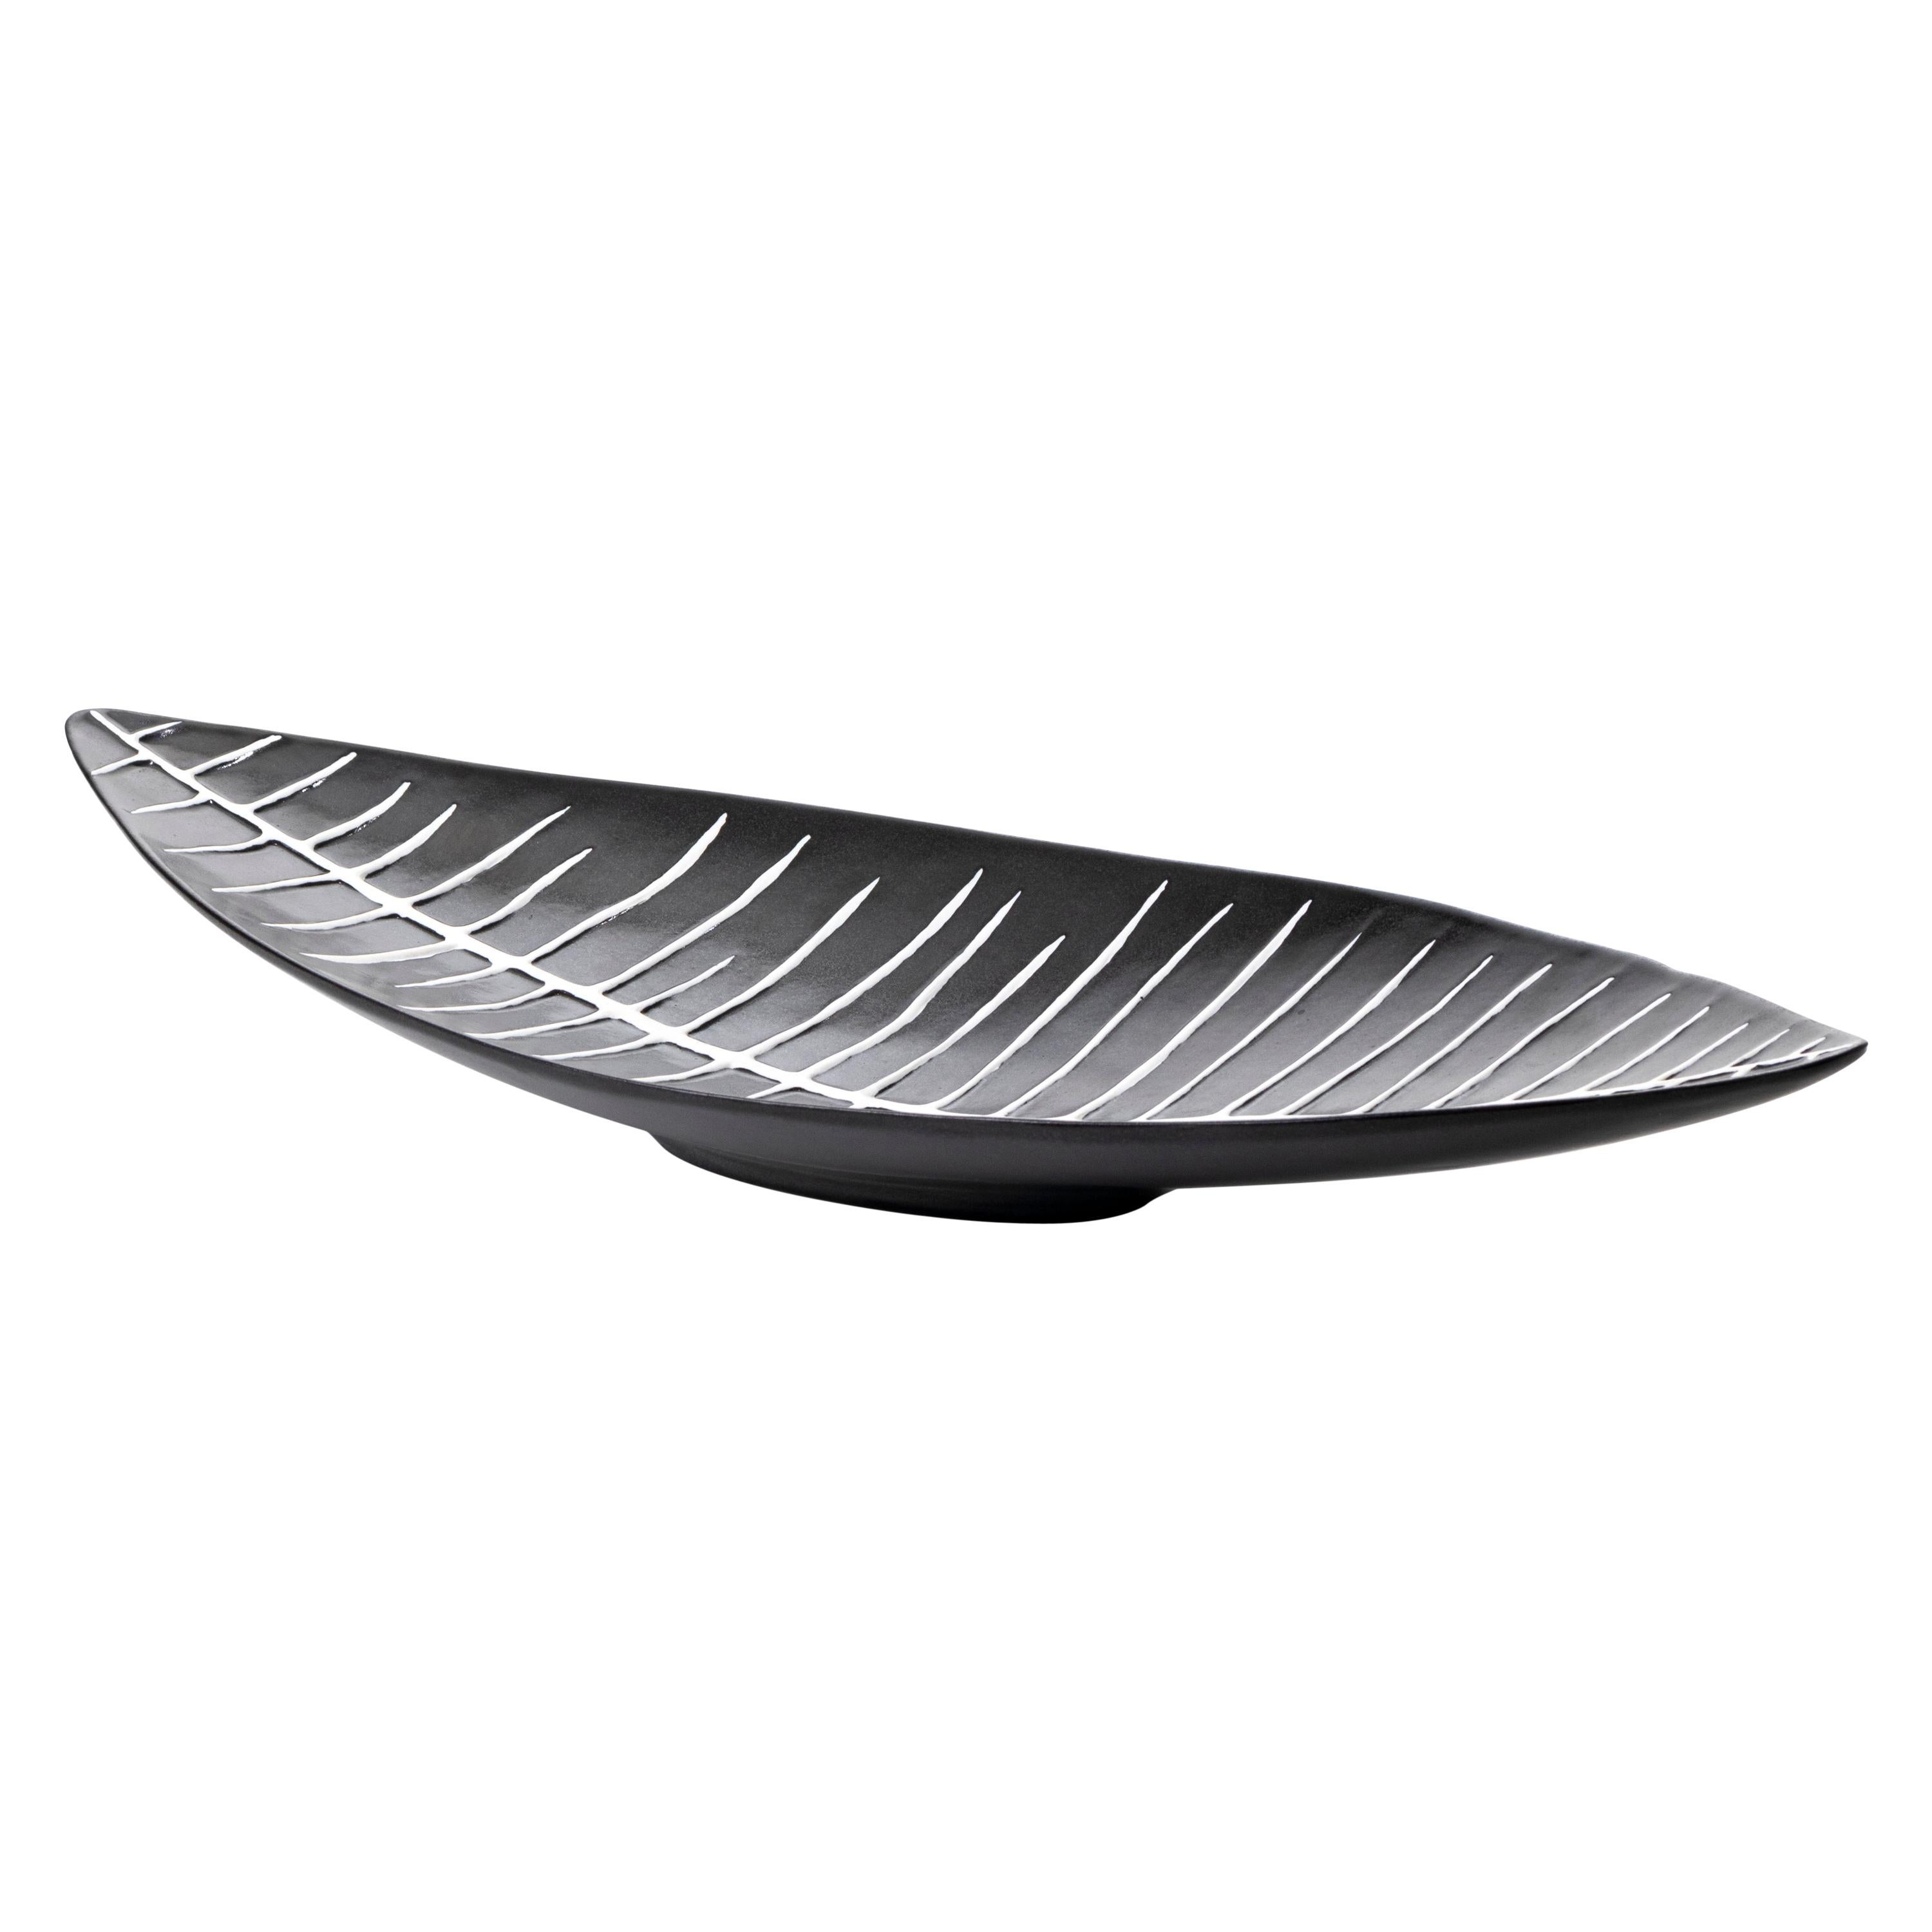 Contemporary Porcelain Oval Centerpiece Bay Leaf Black White Ceramic Italy Fos For Sale